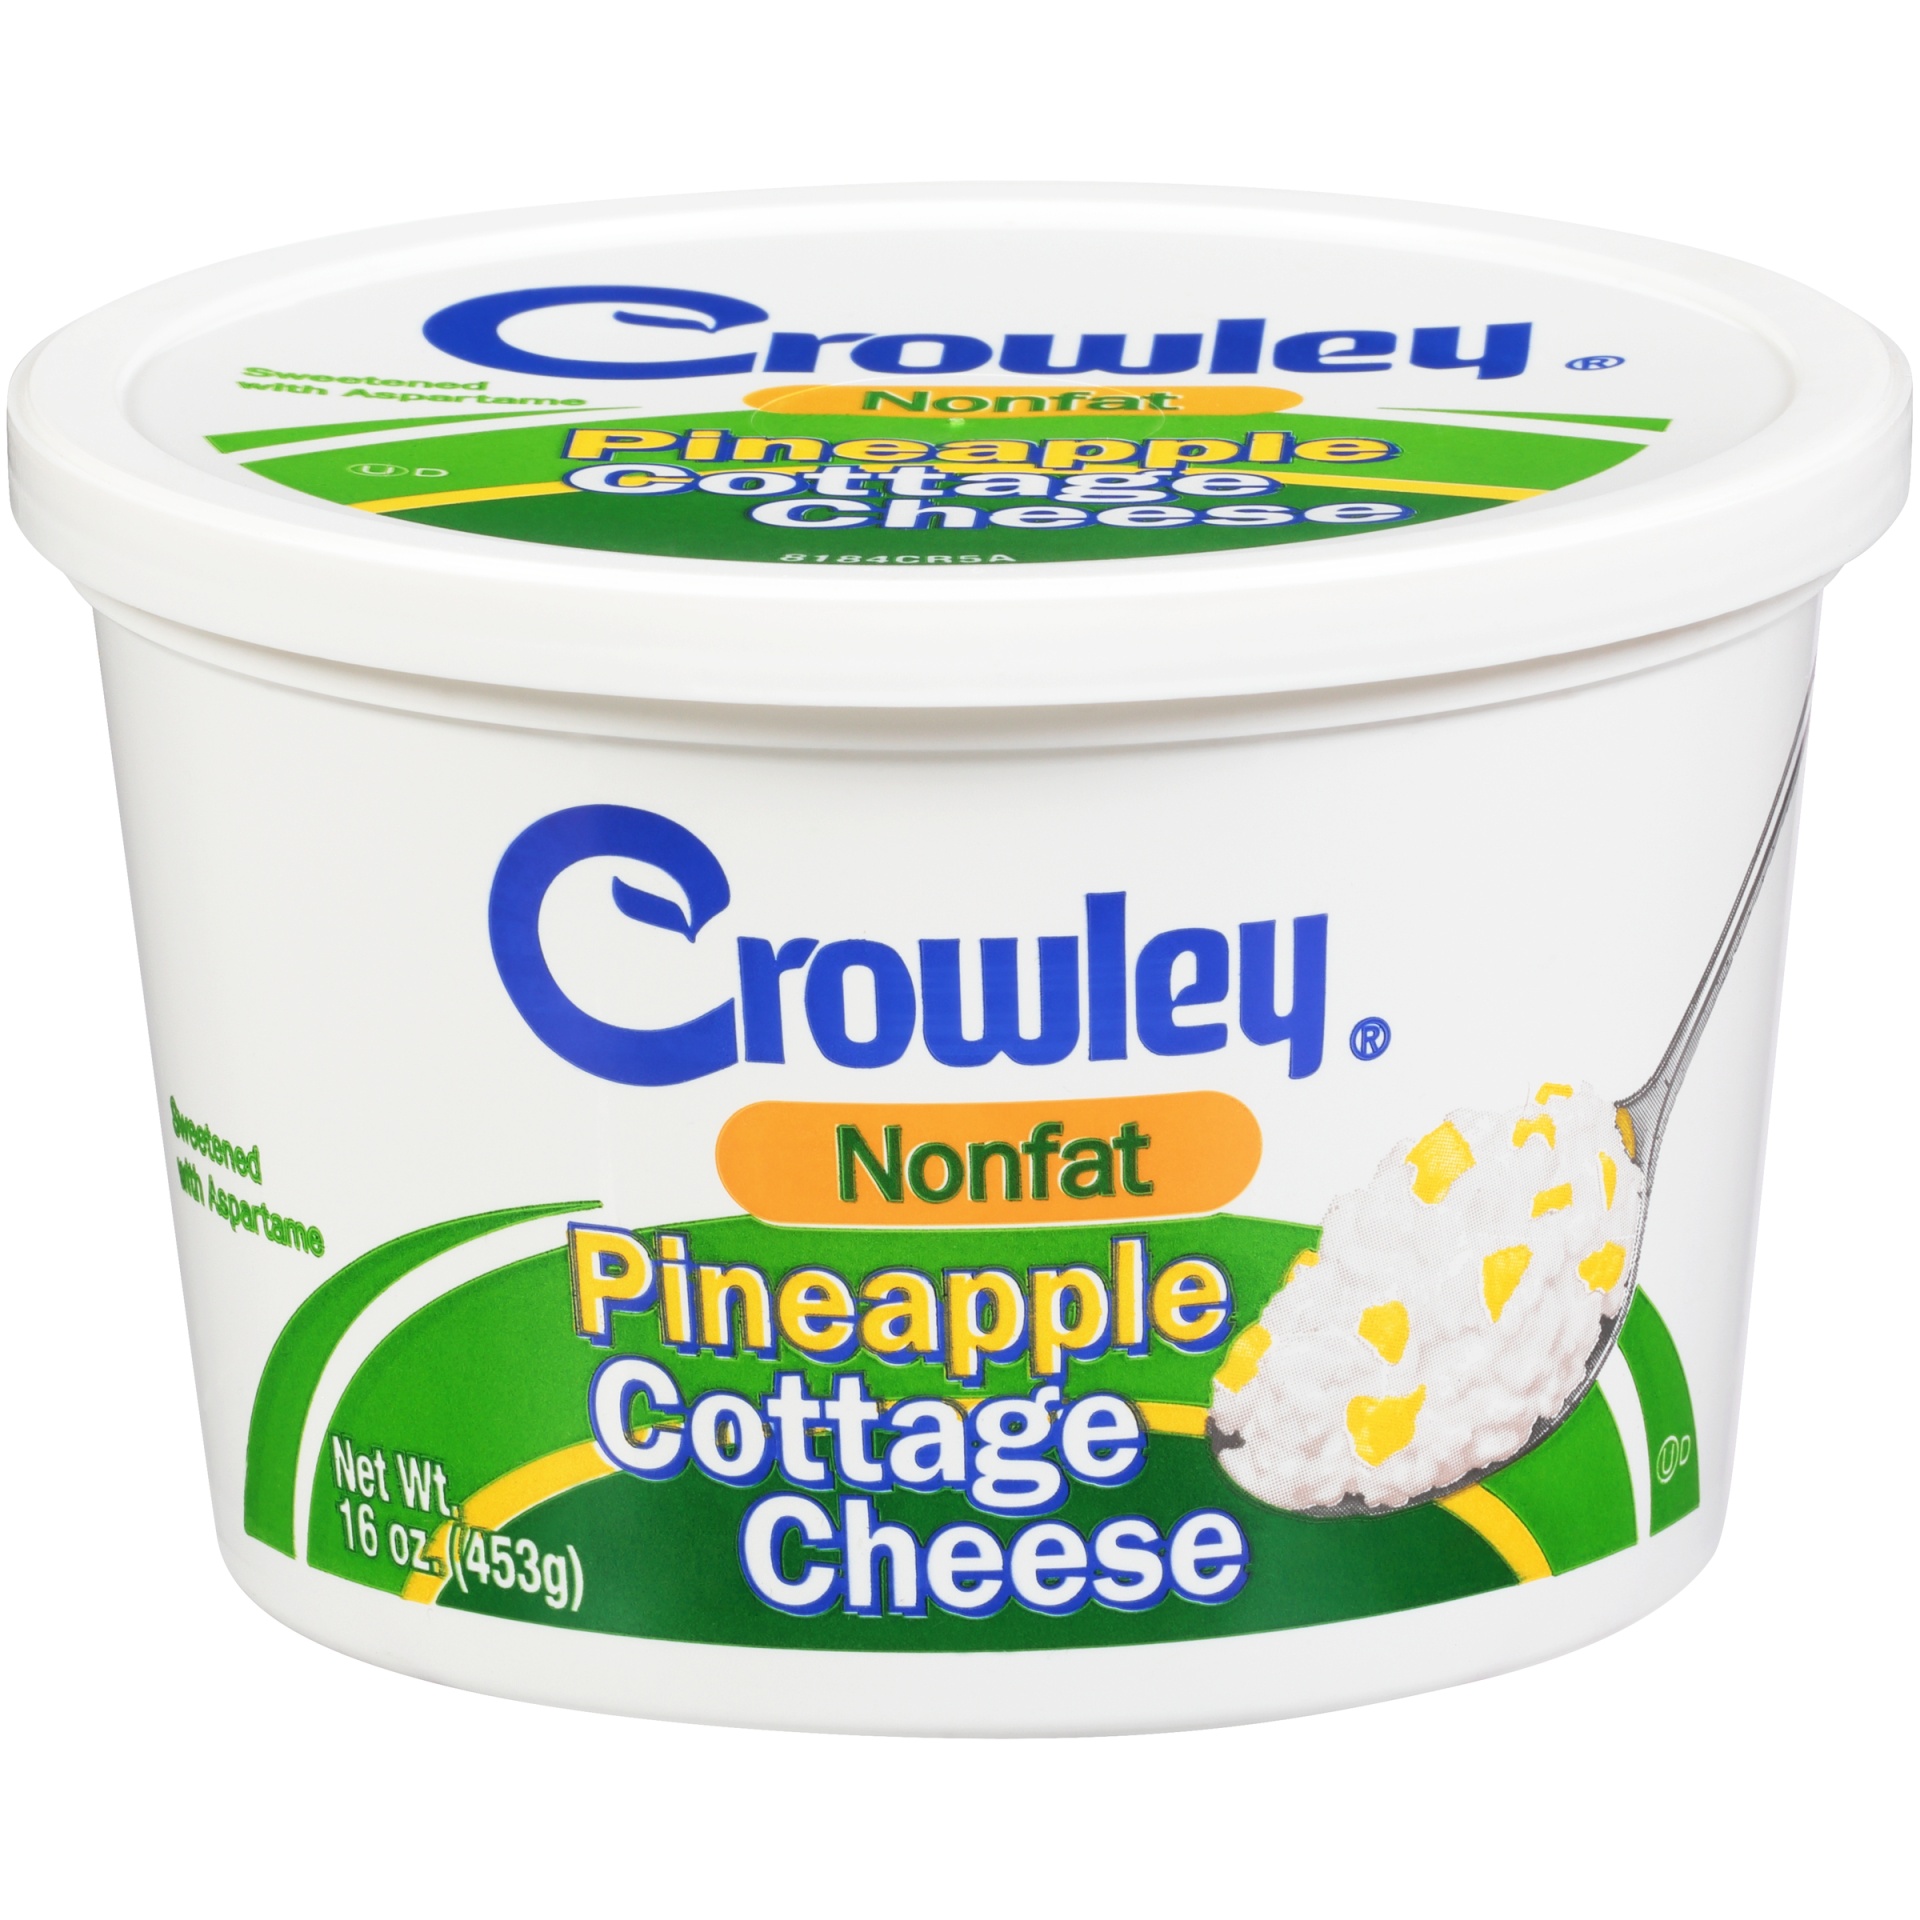 slide 1 of 4, Crowley Nonfat Pineapple Cottage Cheese, 16 oz